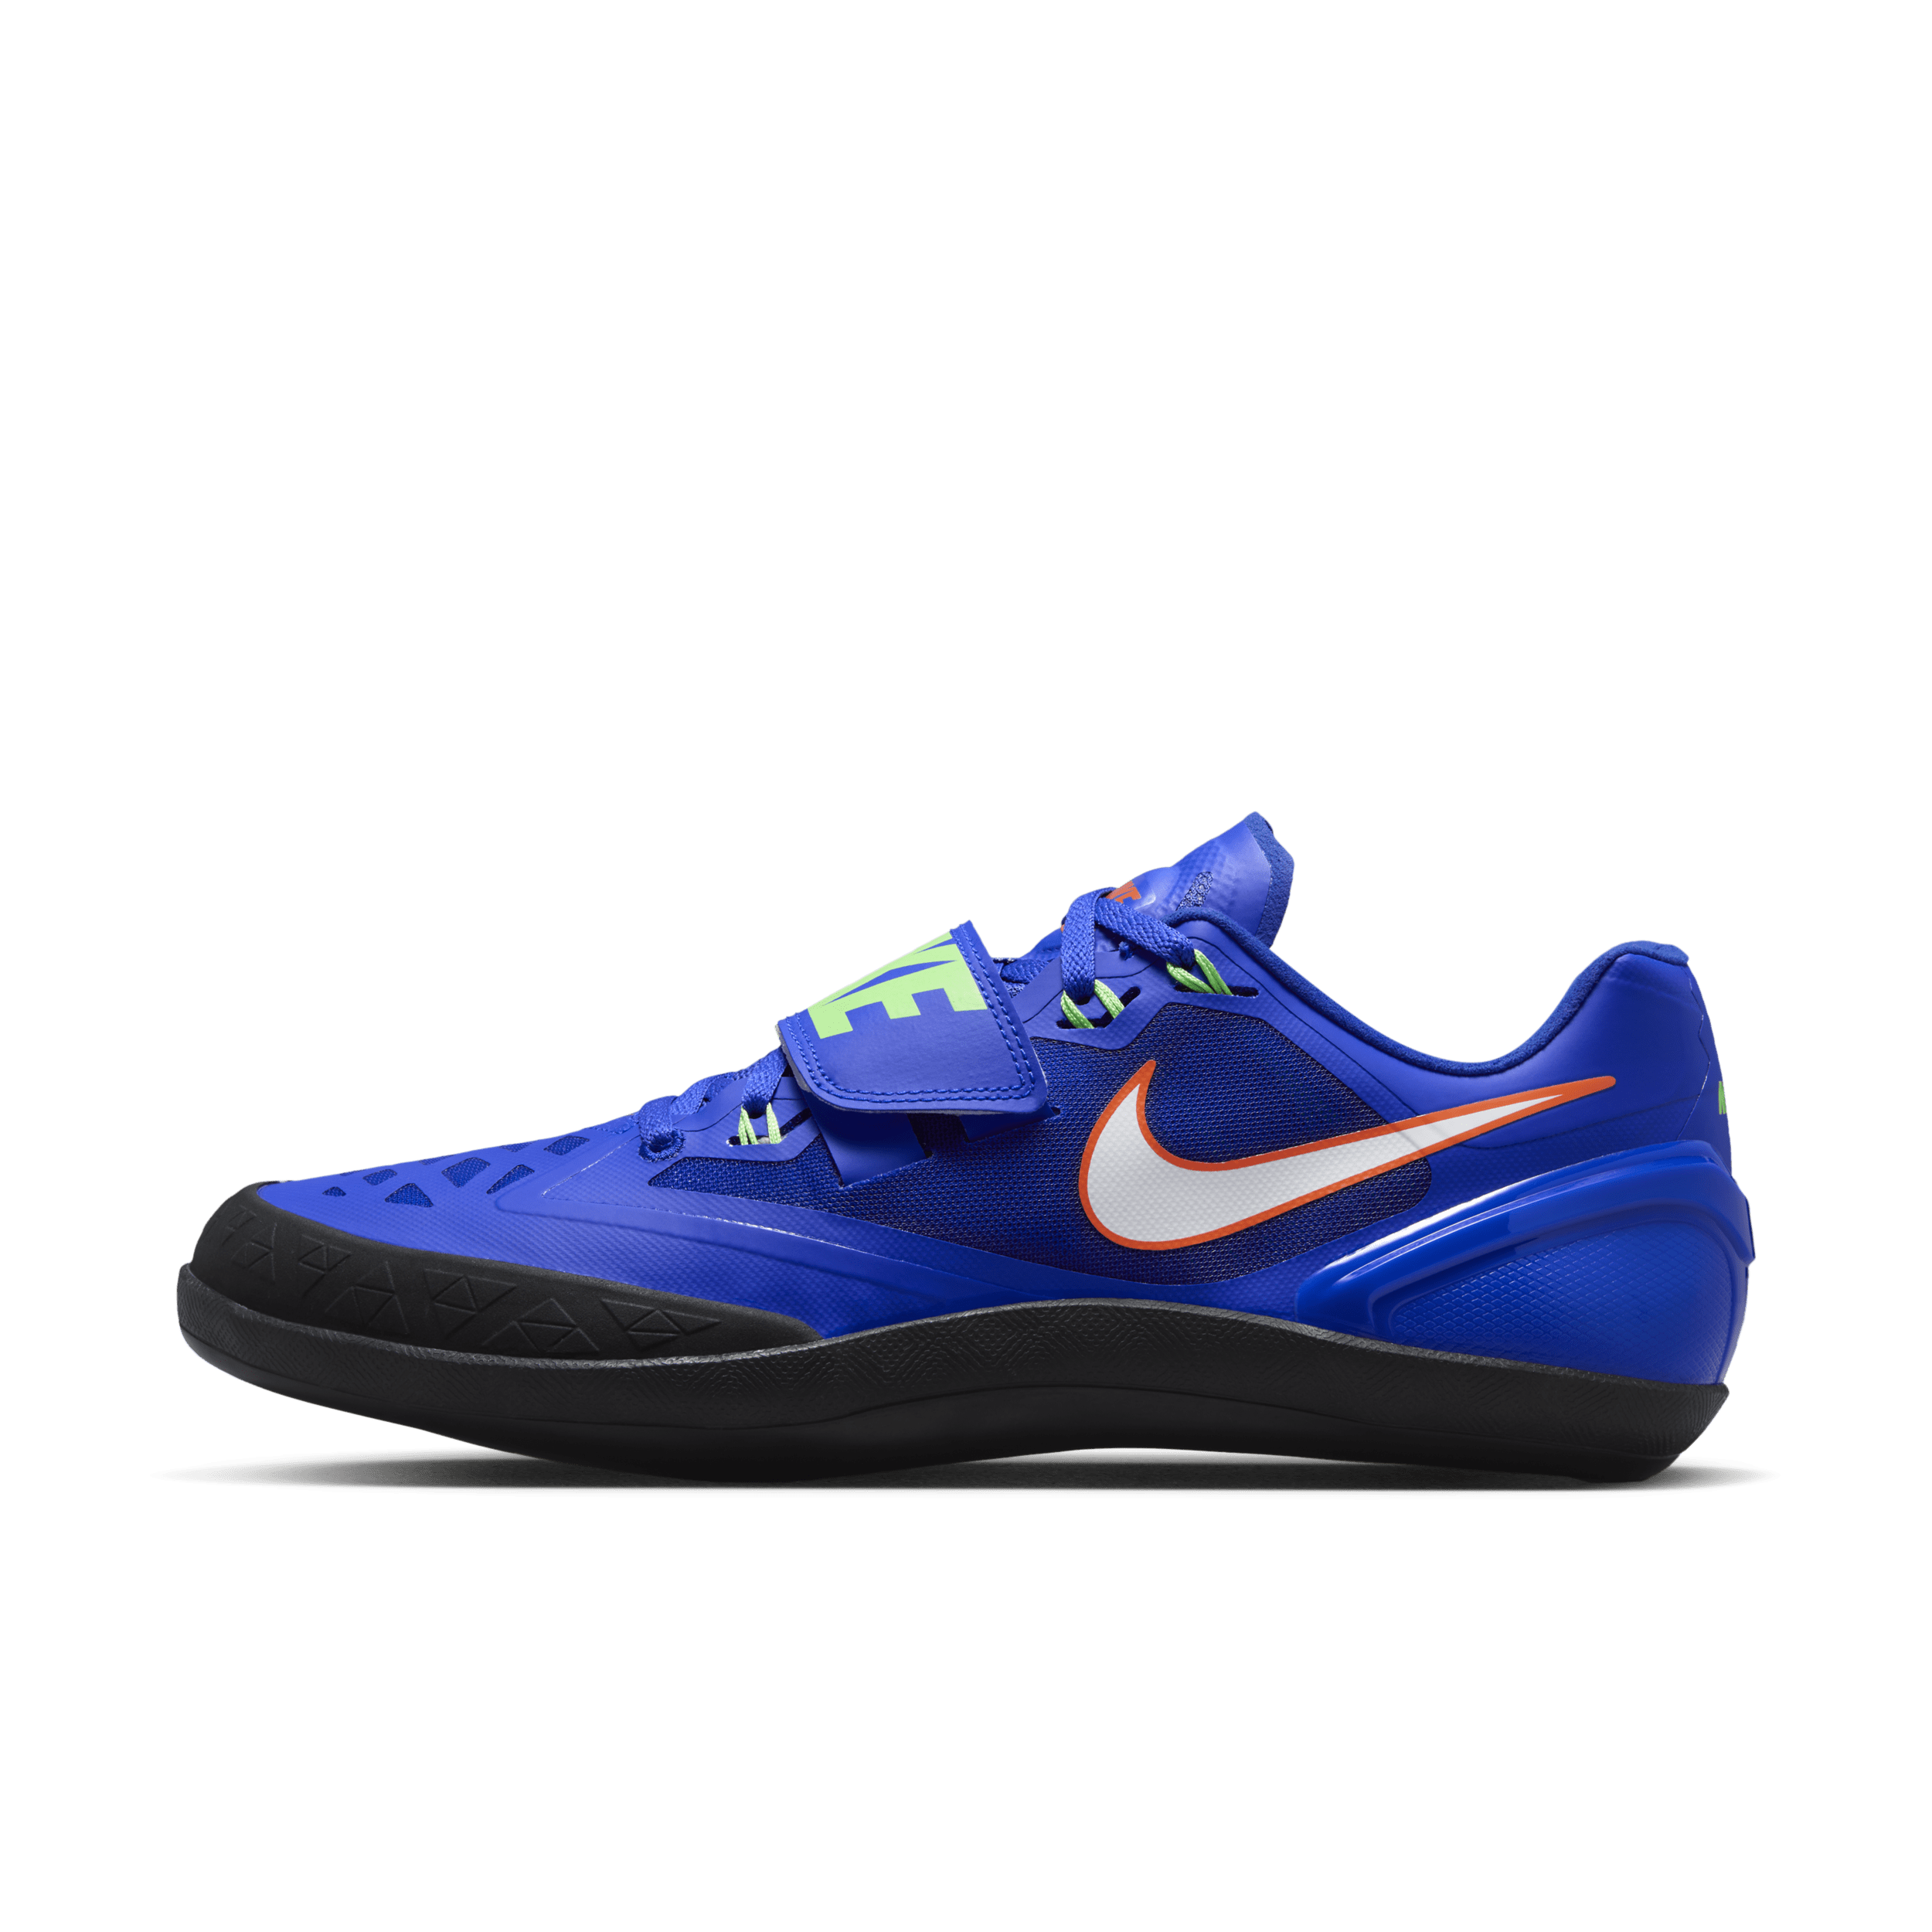 Image of Nike Zoom Rotational 6 Track and field werpschoenen - Blauw